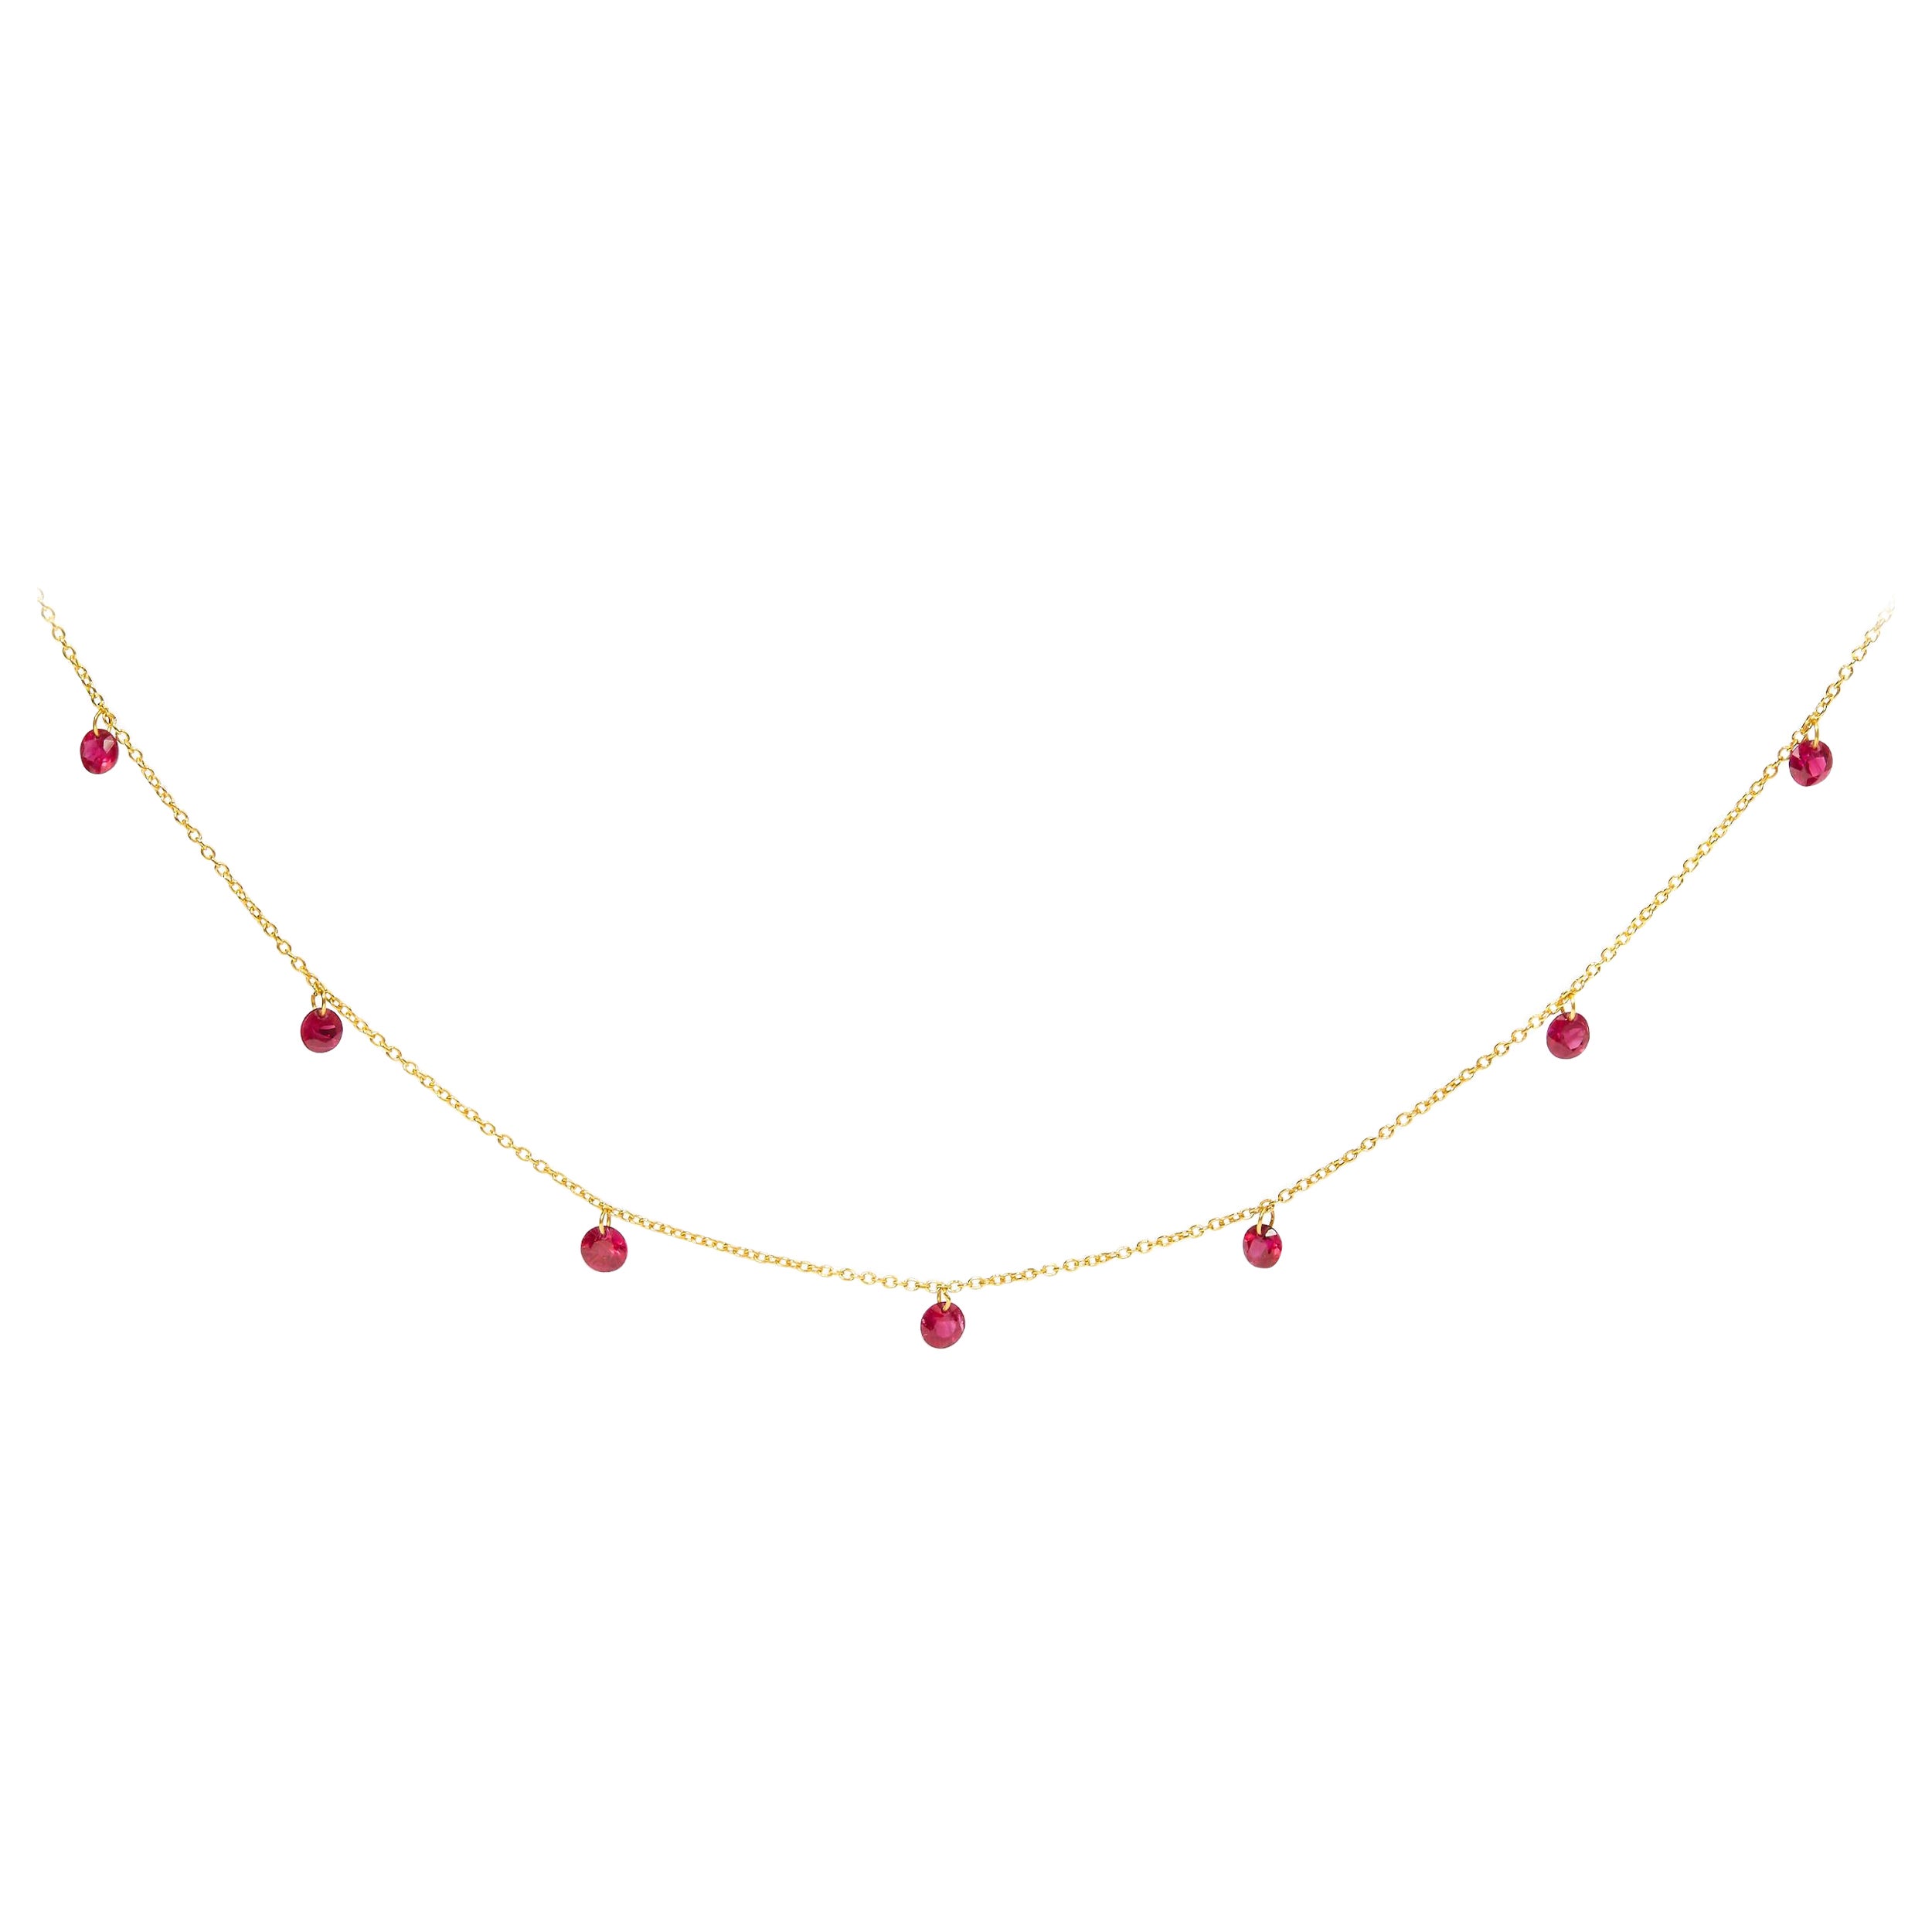 18K Yellow Gold Necklace 1 1/3 Carat Dangling Ruby Drop 18" Chain Collar For Sale